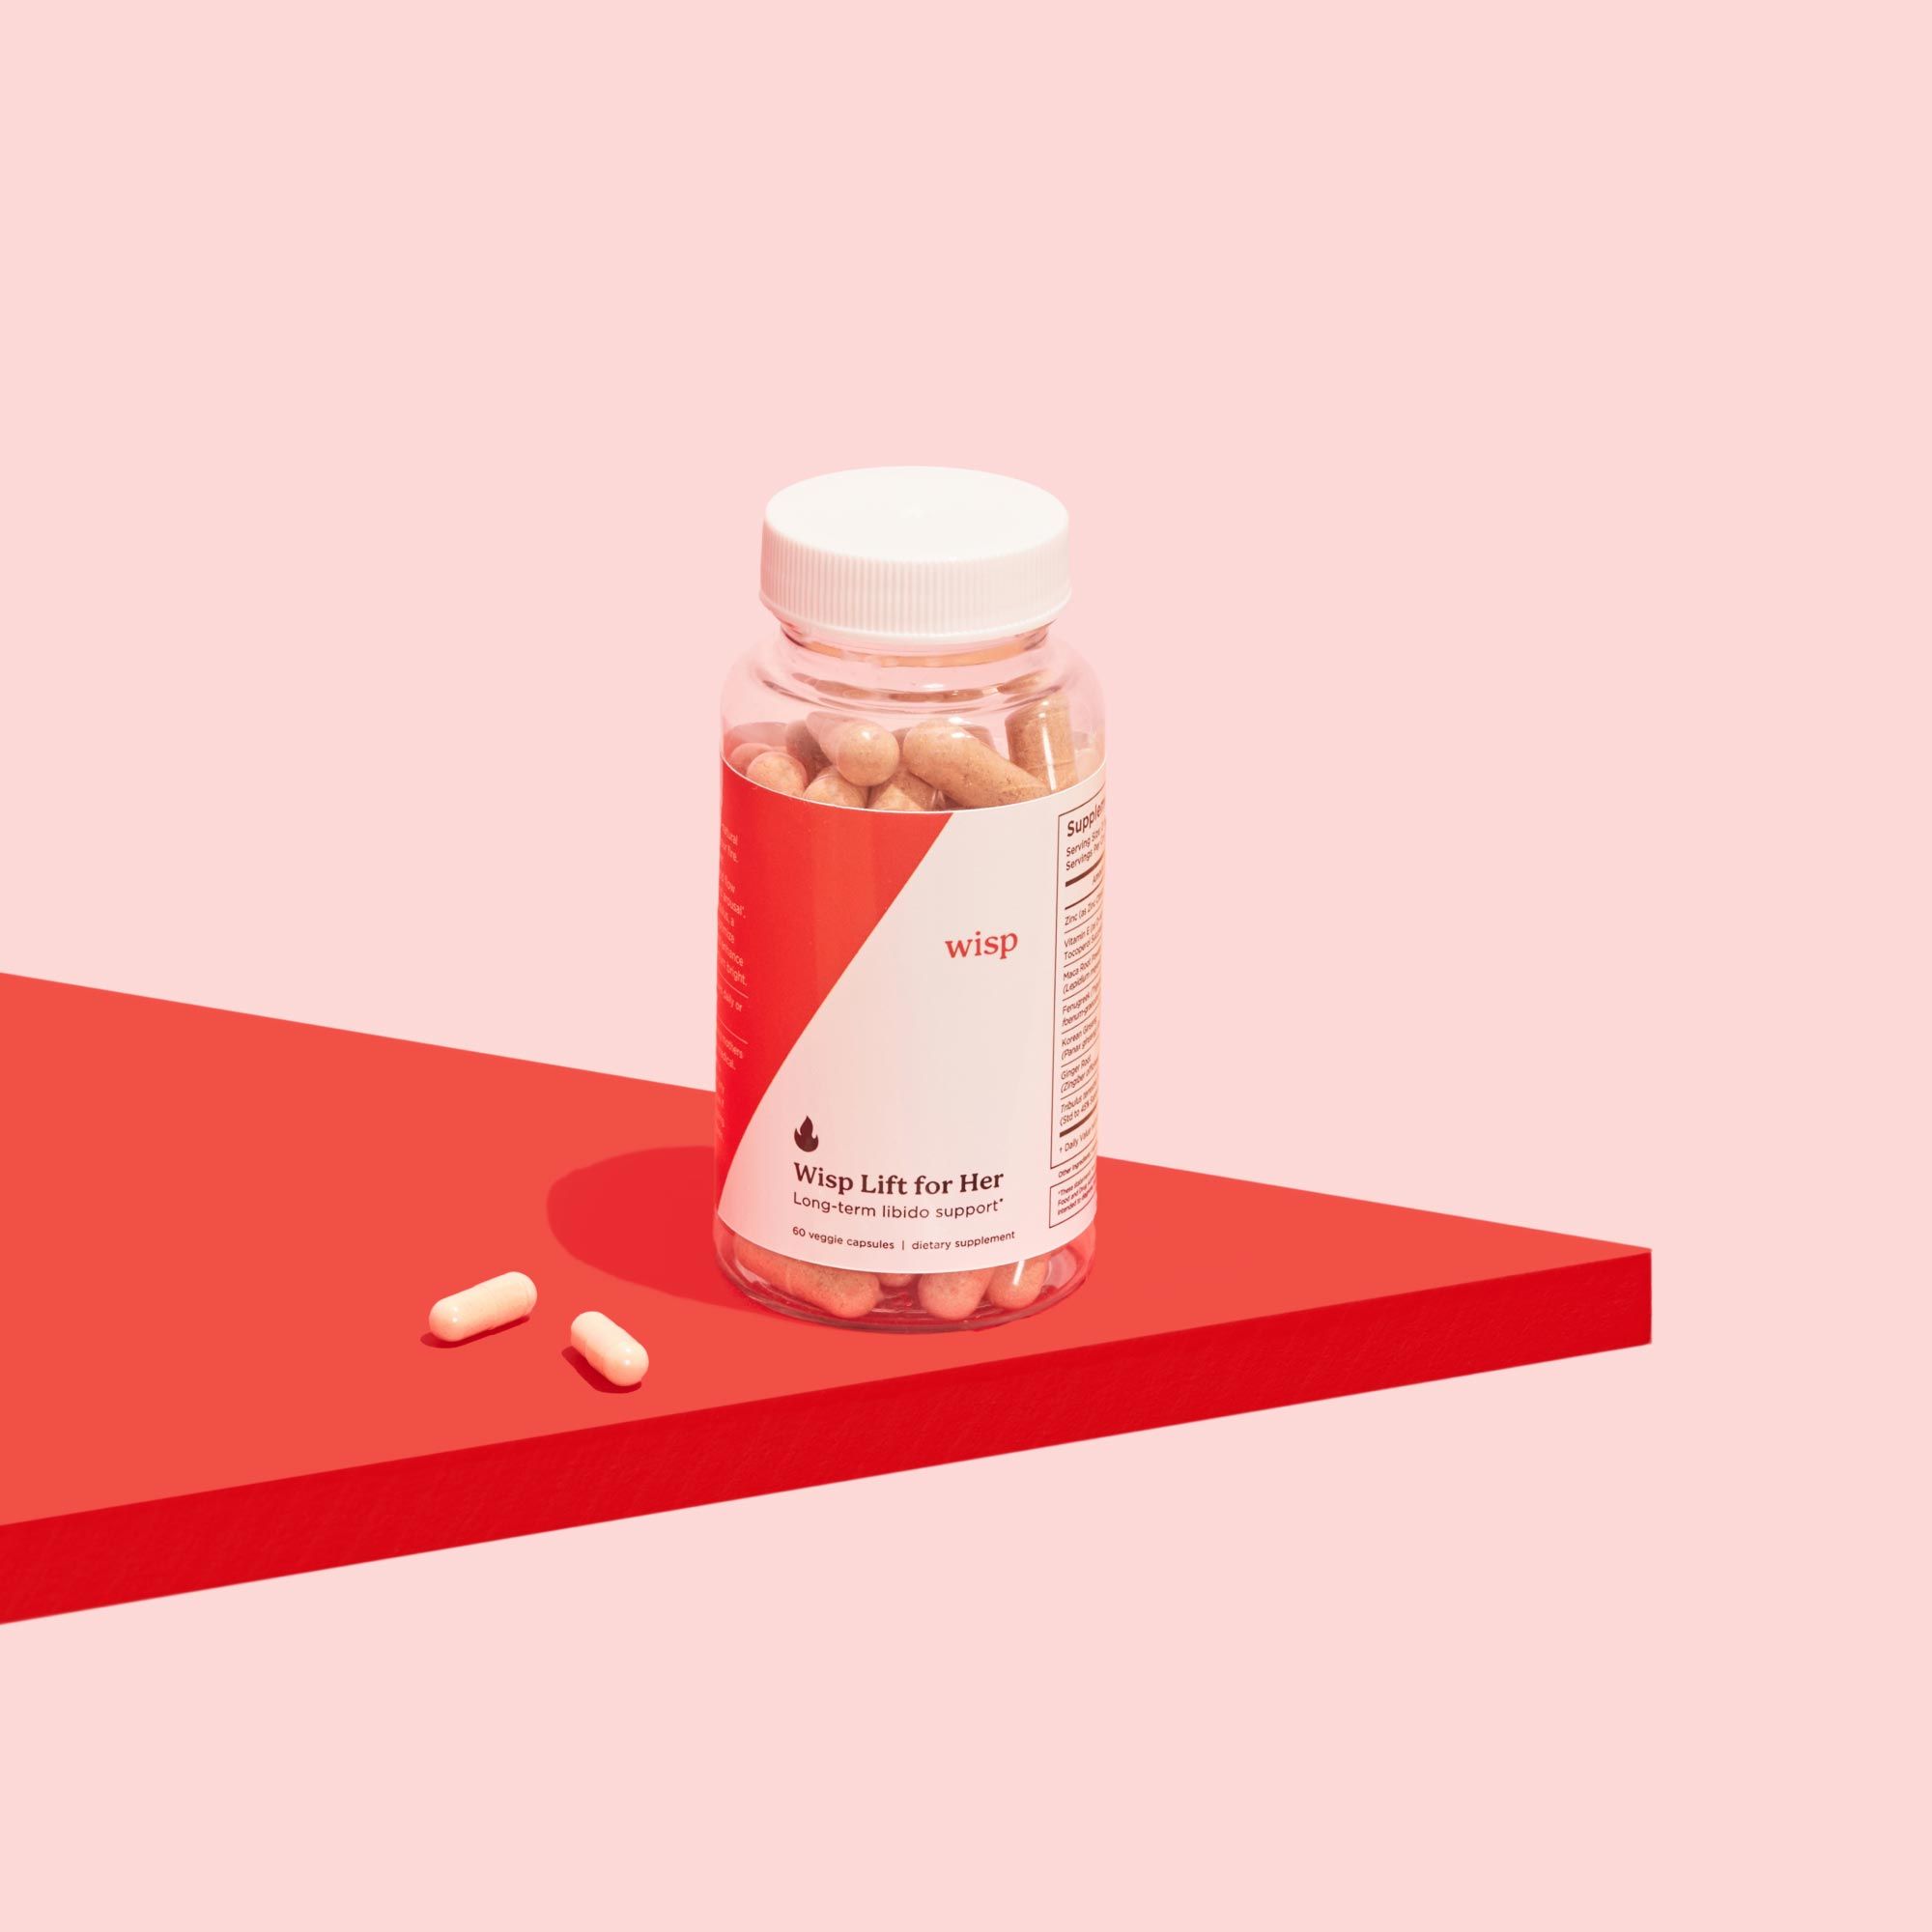 Wisp Lift Libido Supplements for Her with two pills beside the bottle on a red surface with a pink background